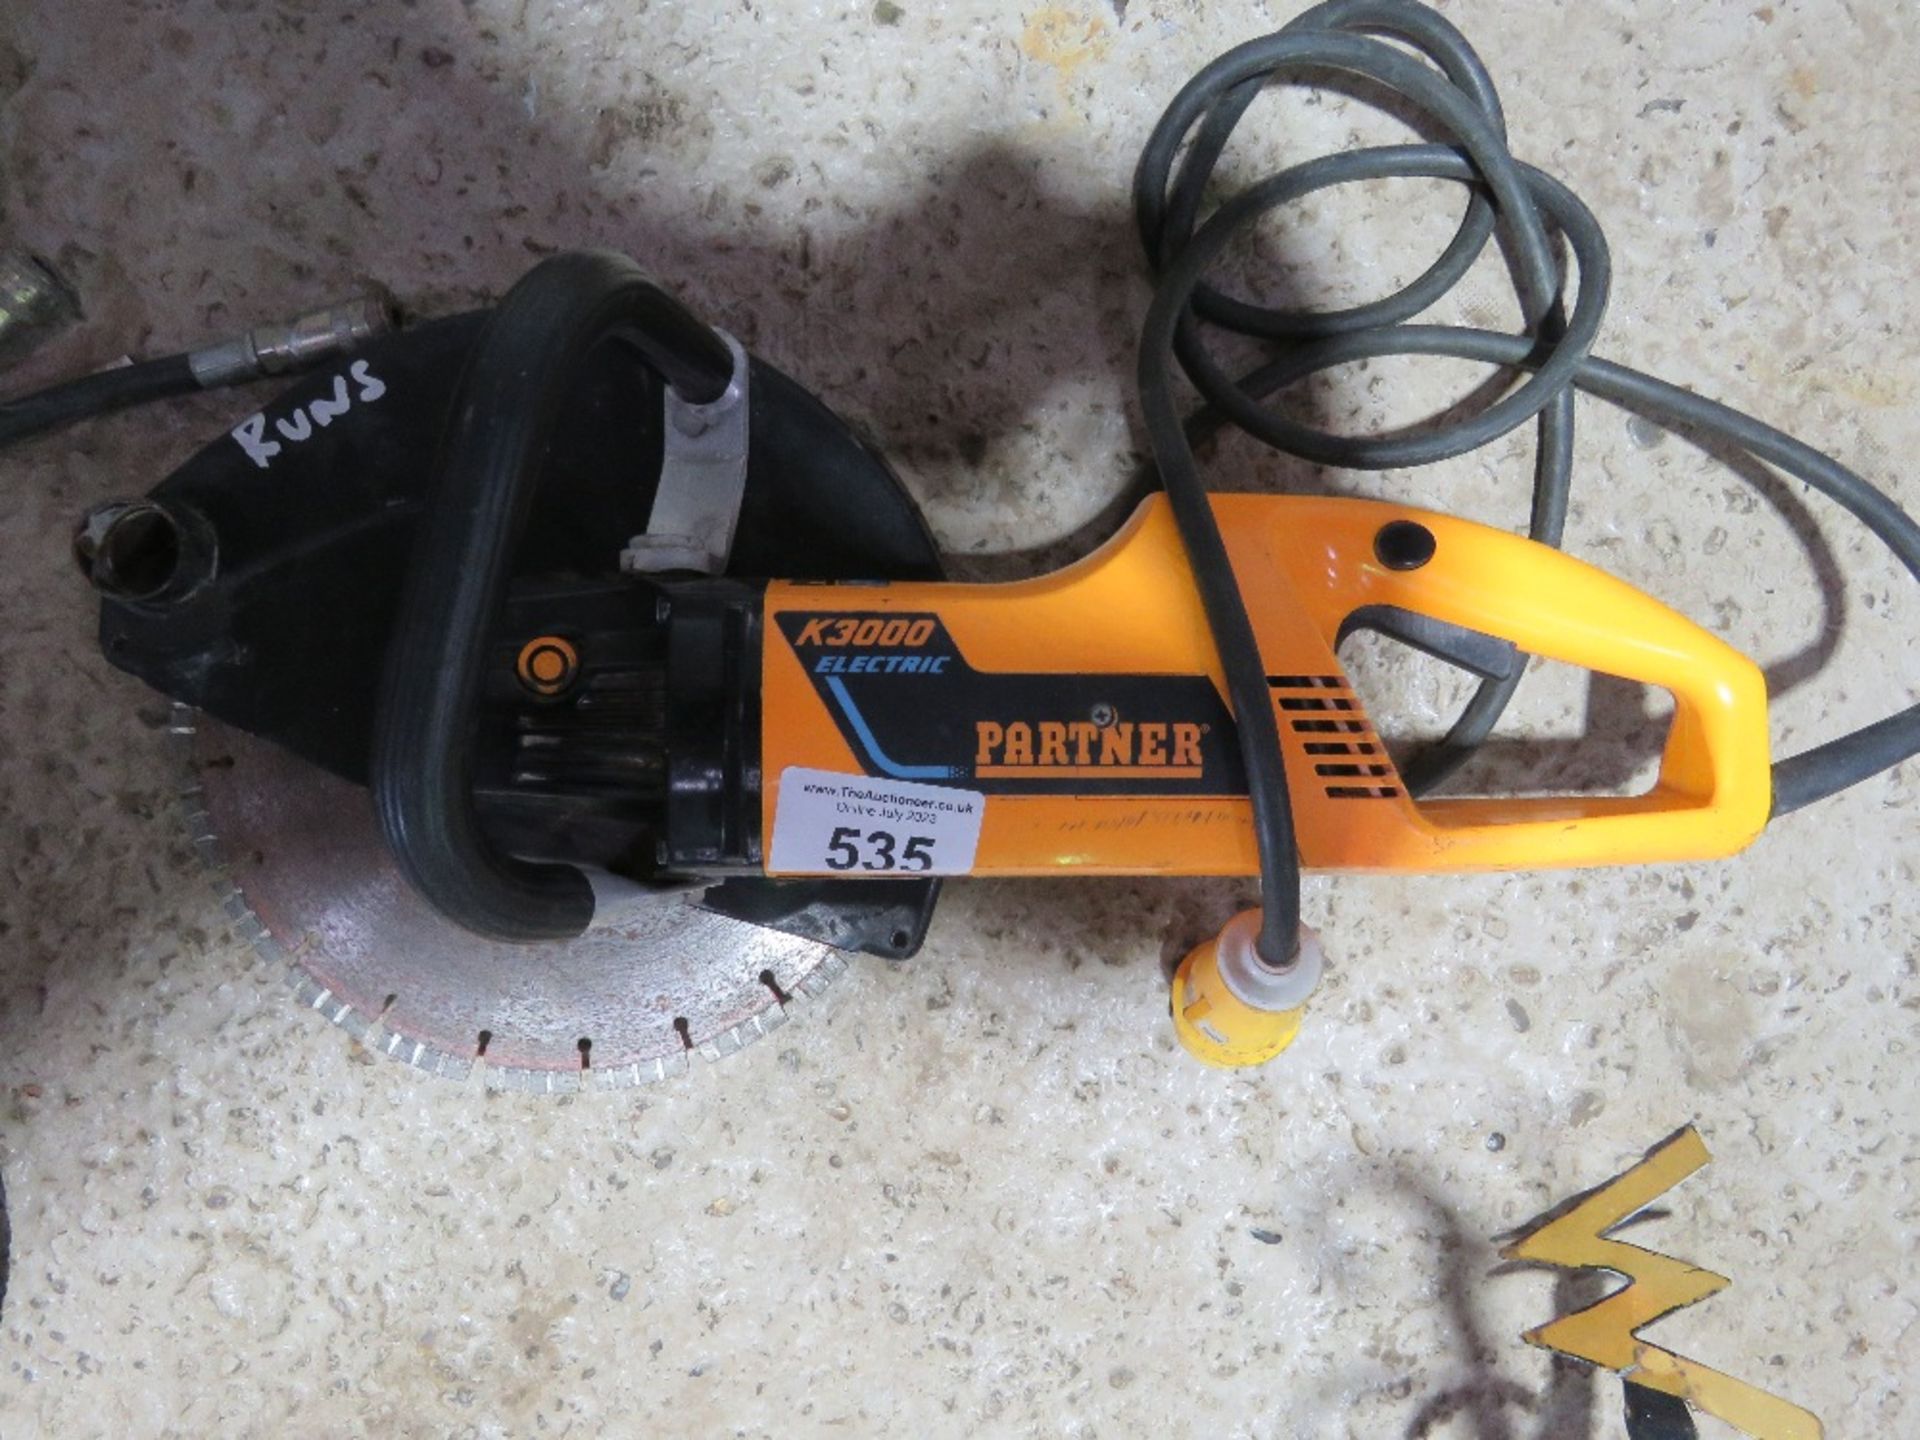 PARTNER K3000 110VOLT POWERED CUT OFF SAW WITH BLADE, SEEN RUNNING. THIS LOT IS SOLD UNDER THE AU